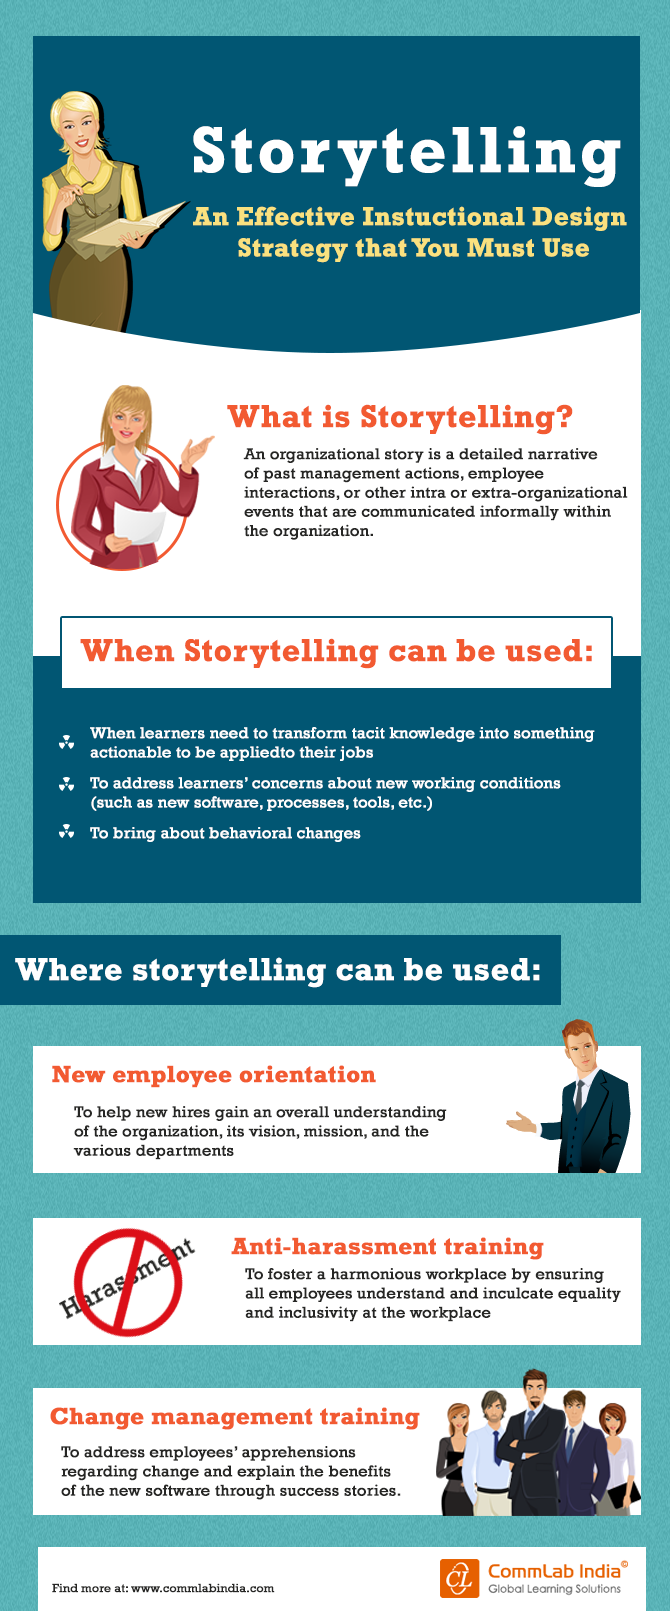 Storytelling - An Effective Instructional Design Strategy You Must Use [Infographic]